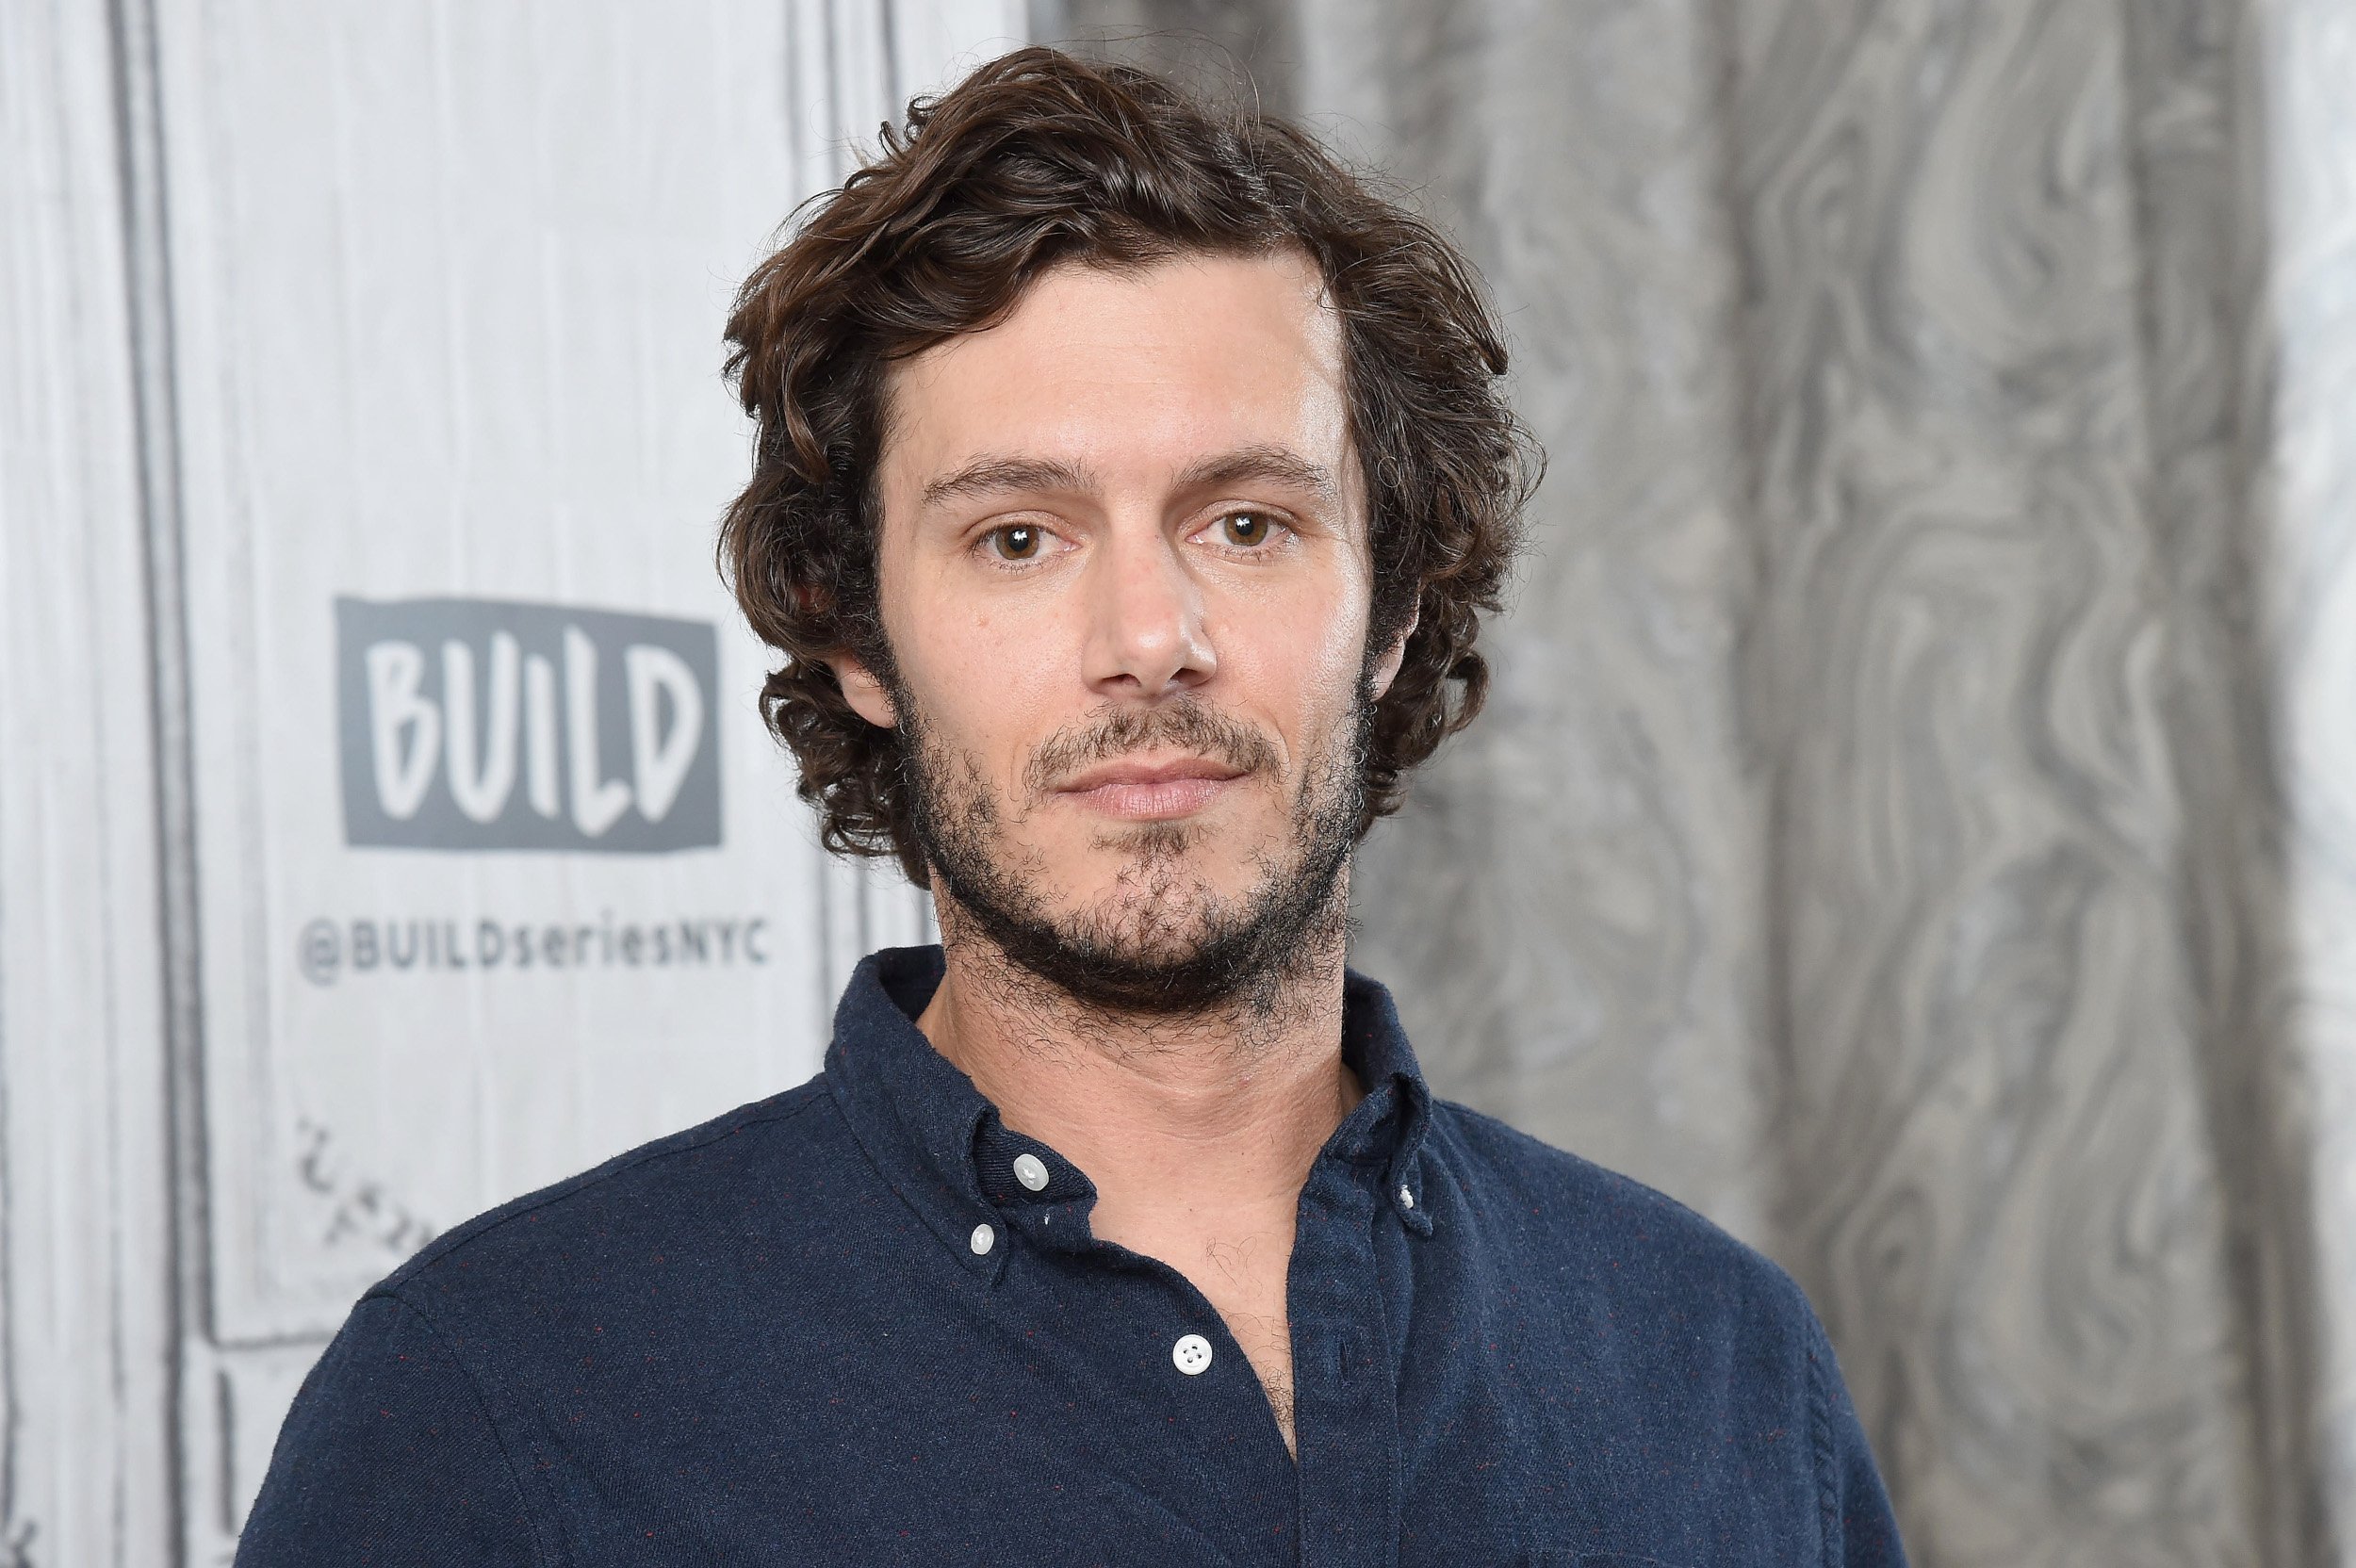 Adam Brody wears a dark blue shirt and stands in front of a Build Series wall